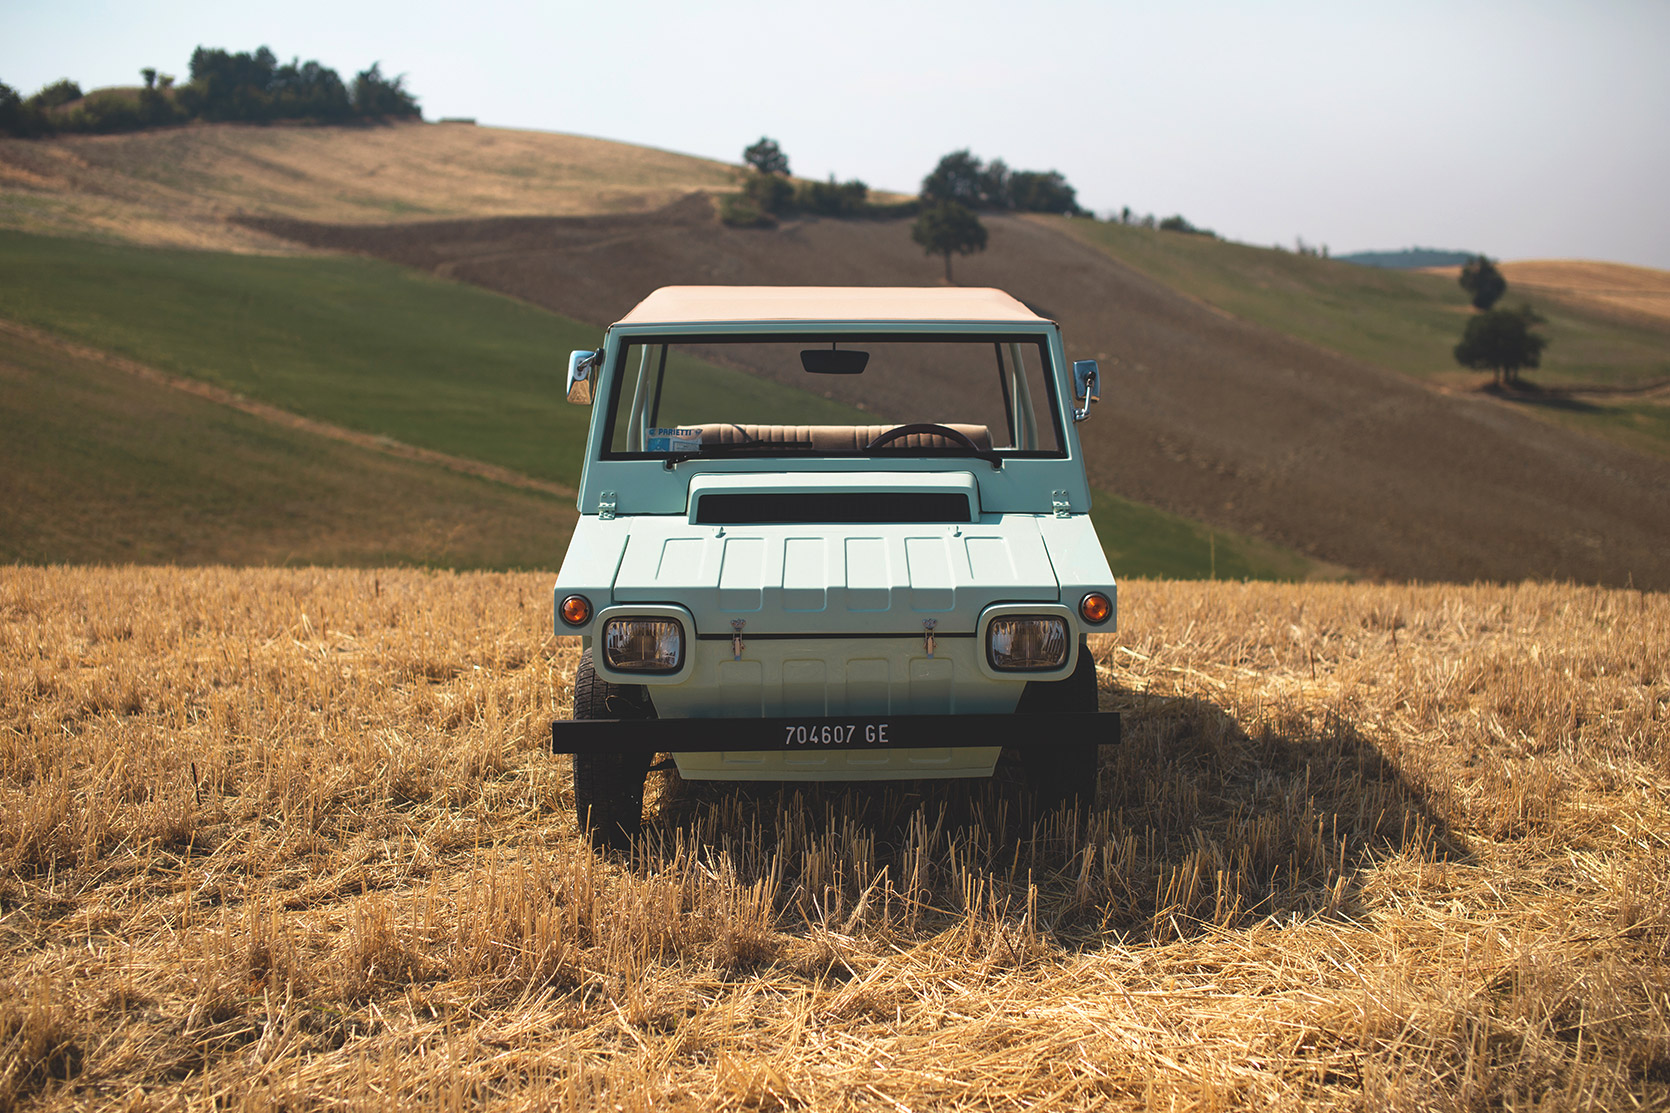 A Fiat 126 named Giungla by Garage Italia in the countryside